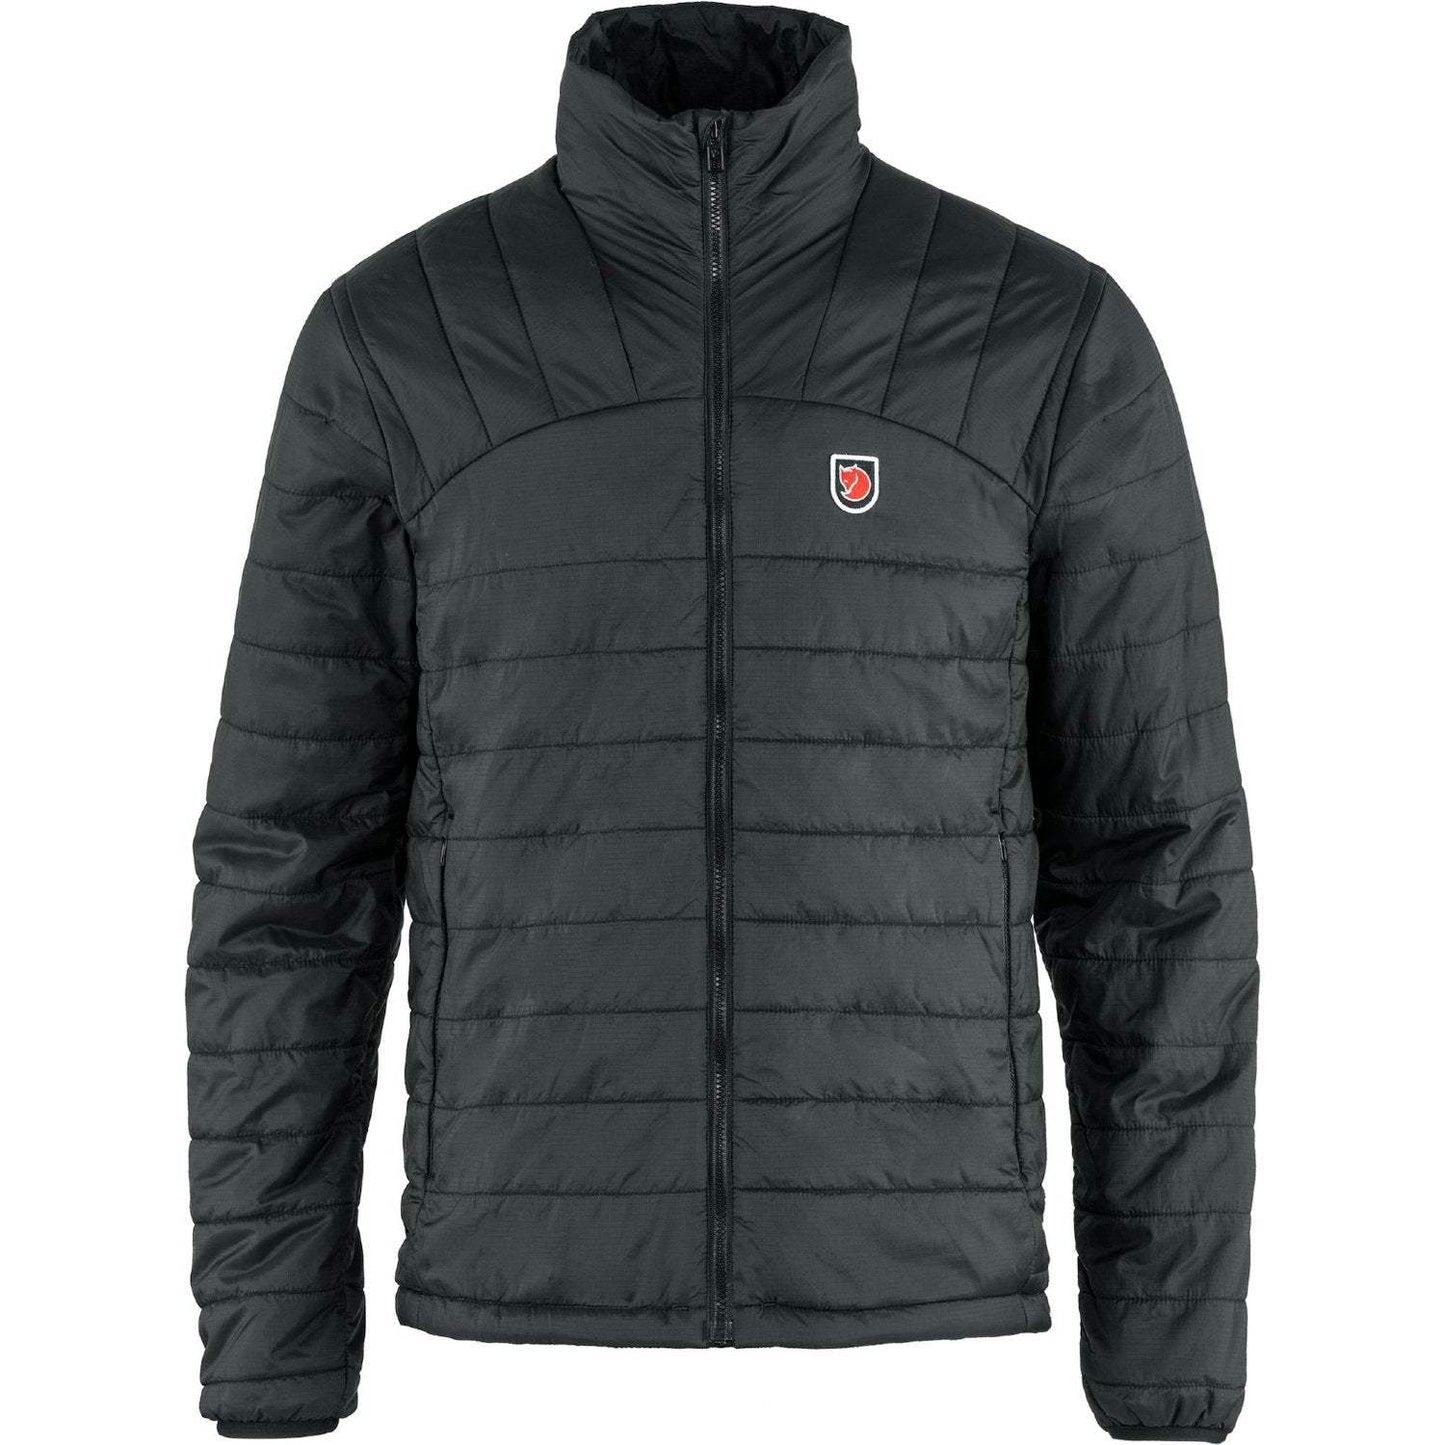 Fjallraven Men's Expedition X-Latt Jacket - The Luxury Promotional Gifts Company Limited